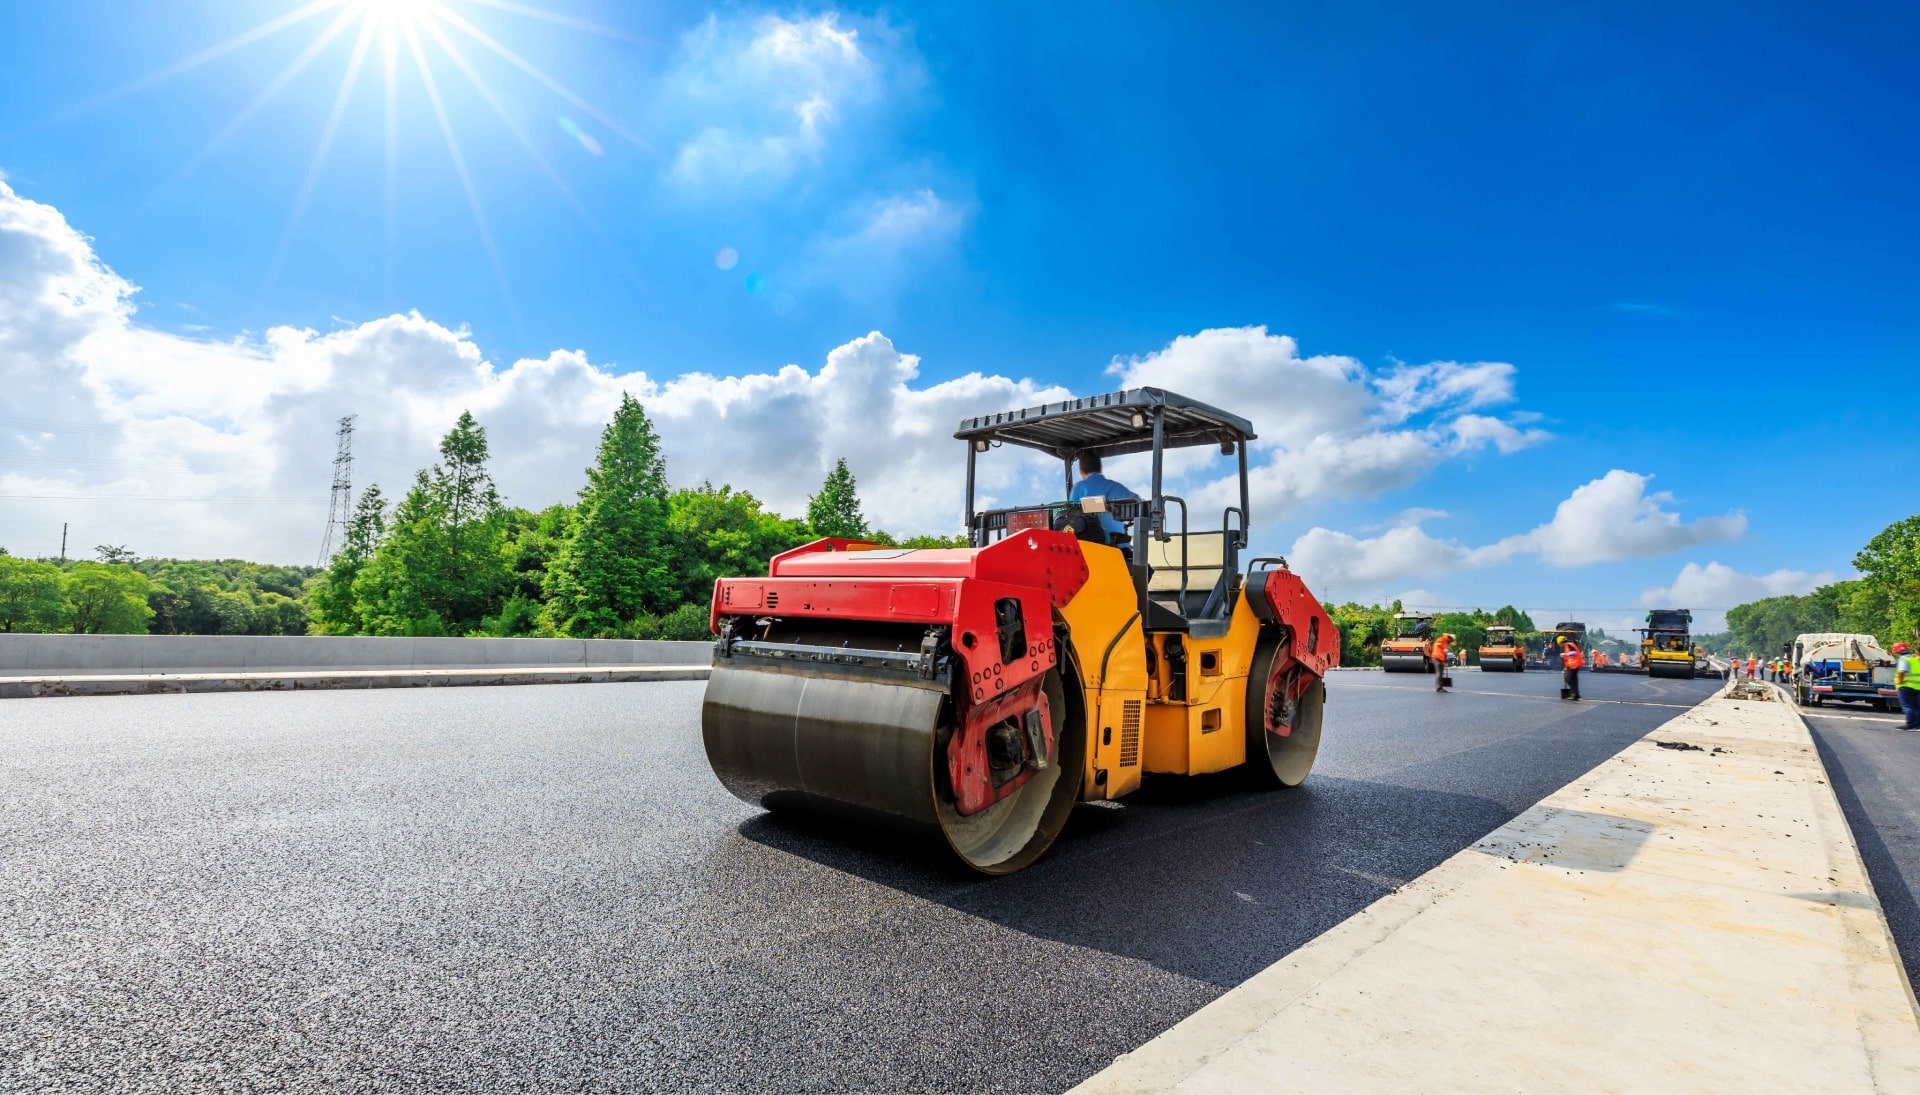 A team of construction workers operating heavy machinery, meticulously laying down fresh, smooth asphalt on a newly constructed road in Saint Petersburg, with steam rising from the hot surface.